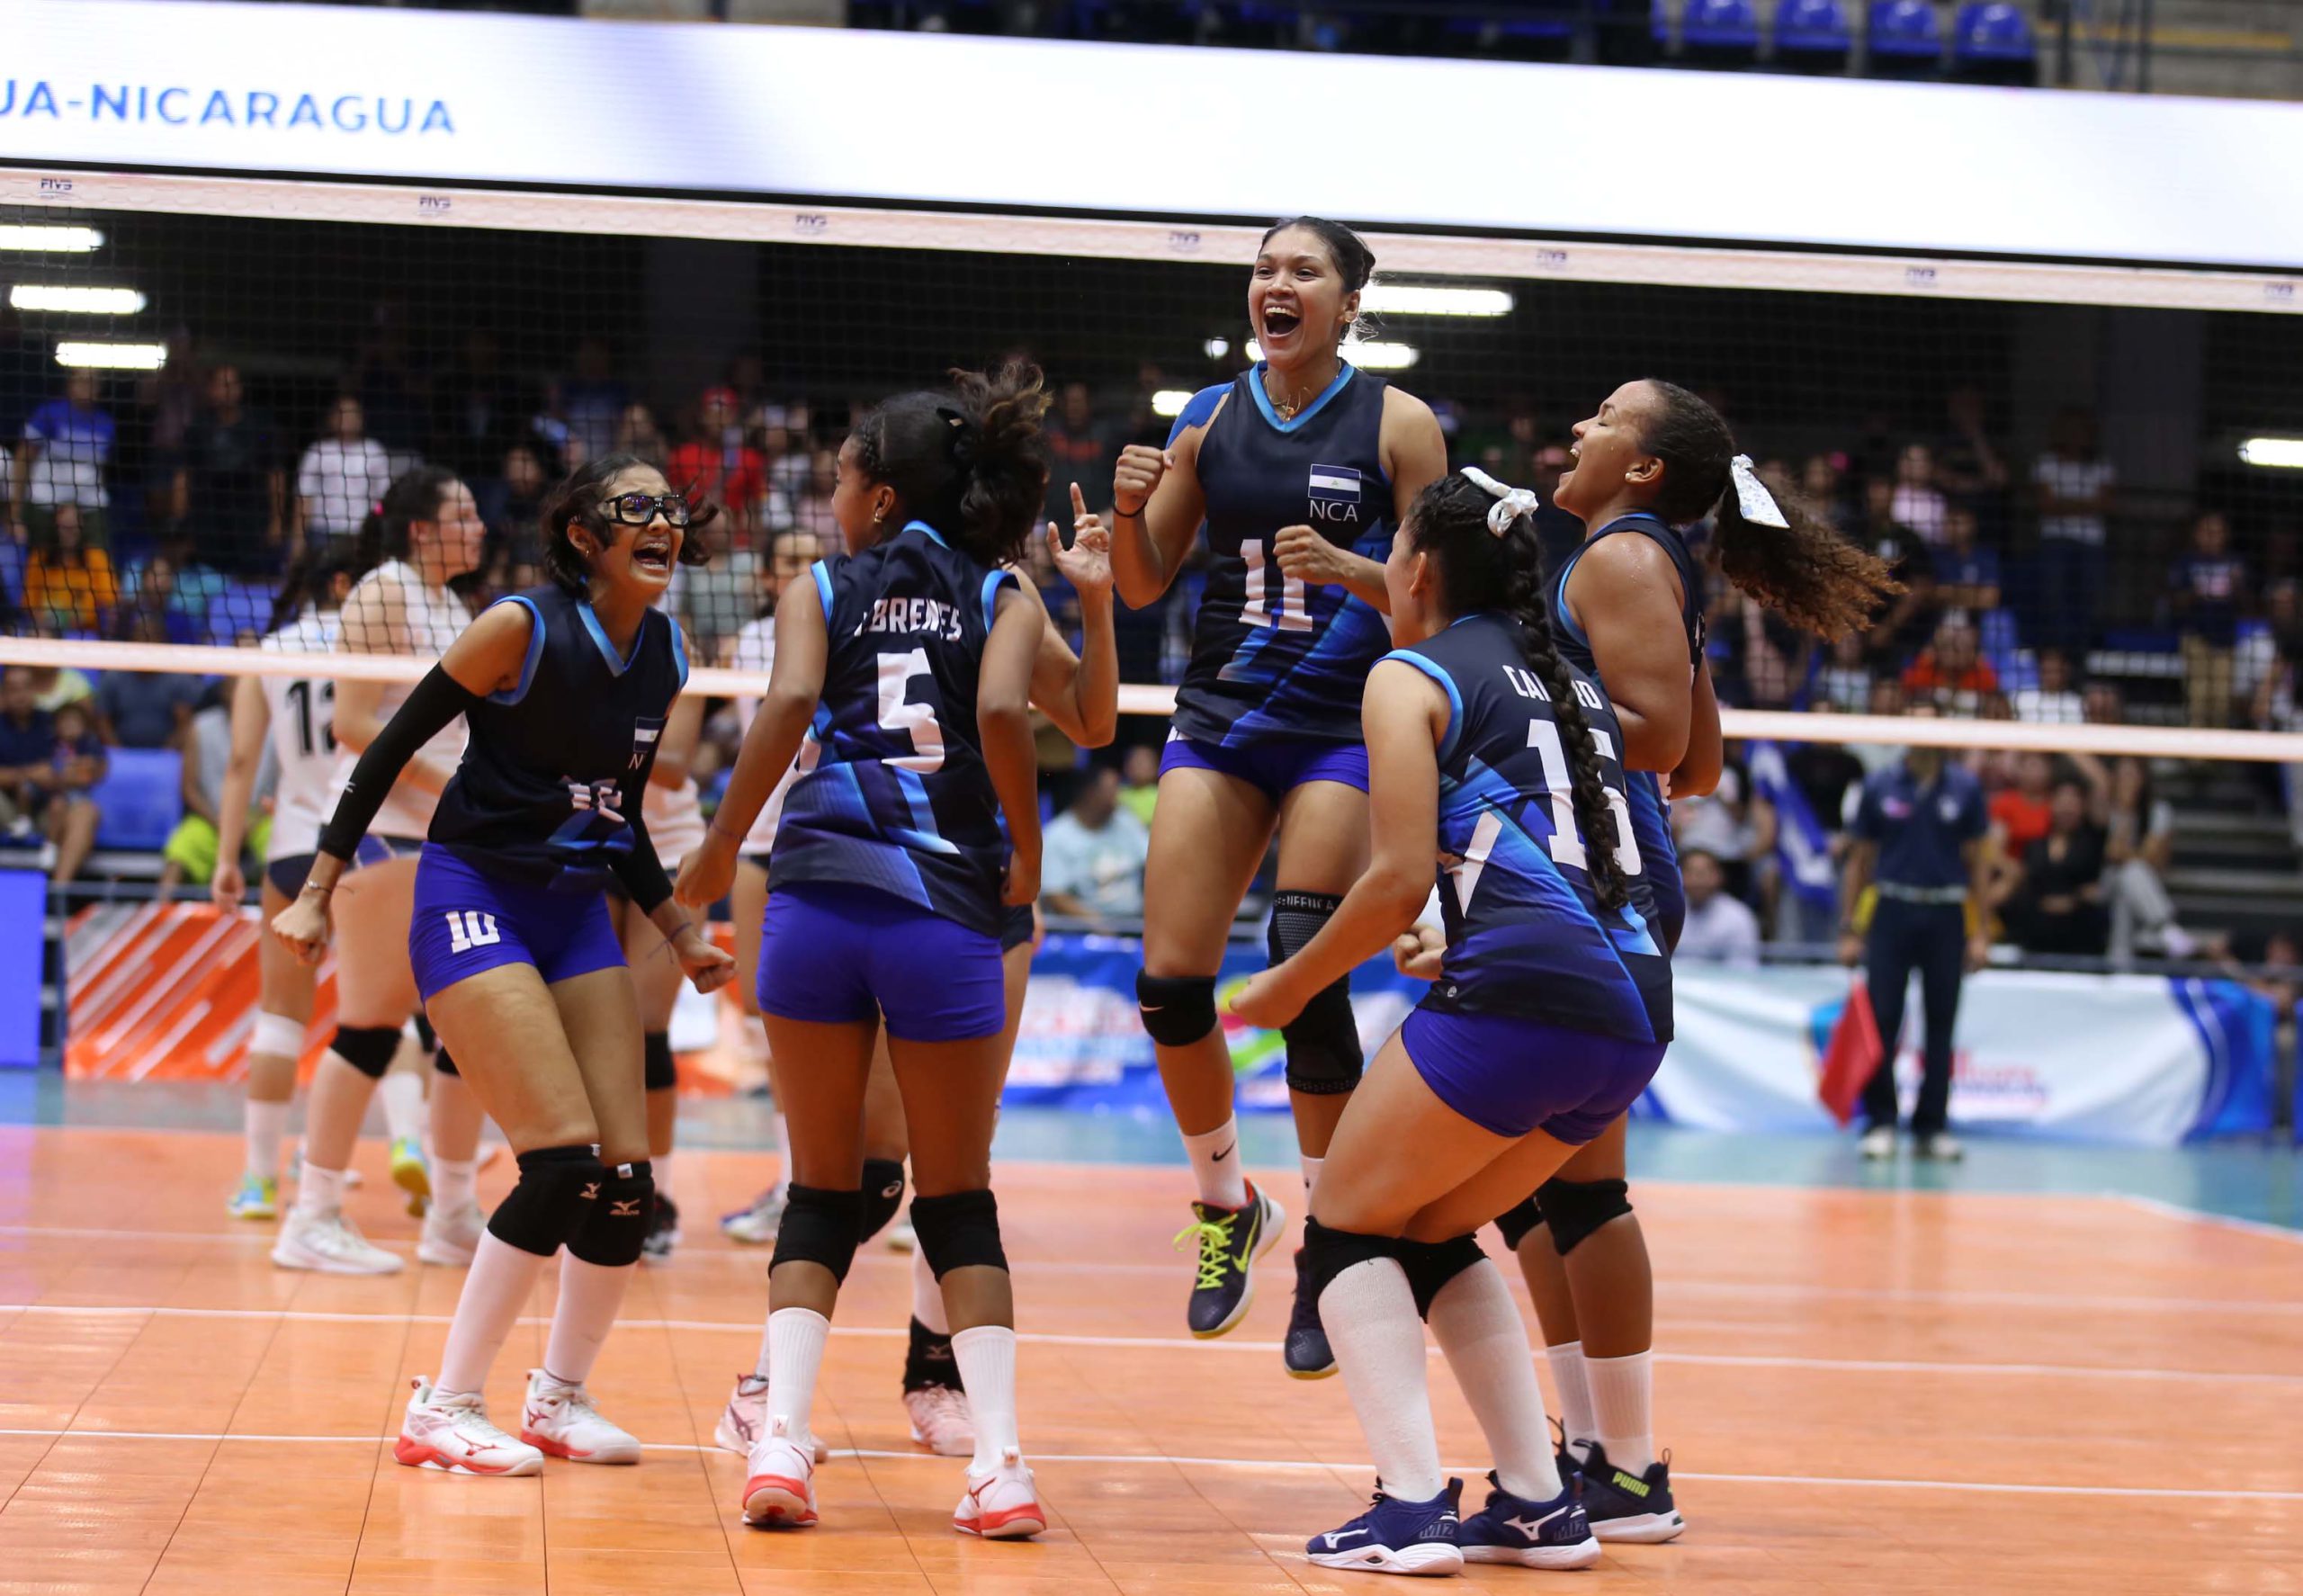 Nicaragua with dramatic five-set victory over Guatemala